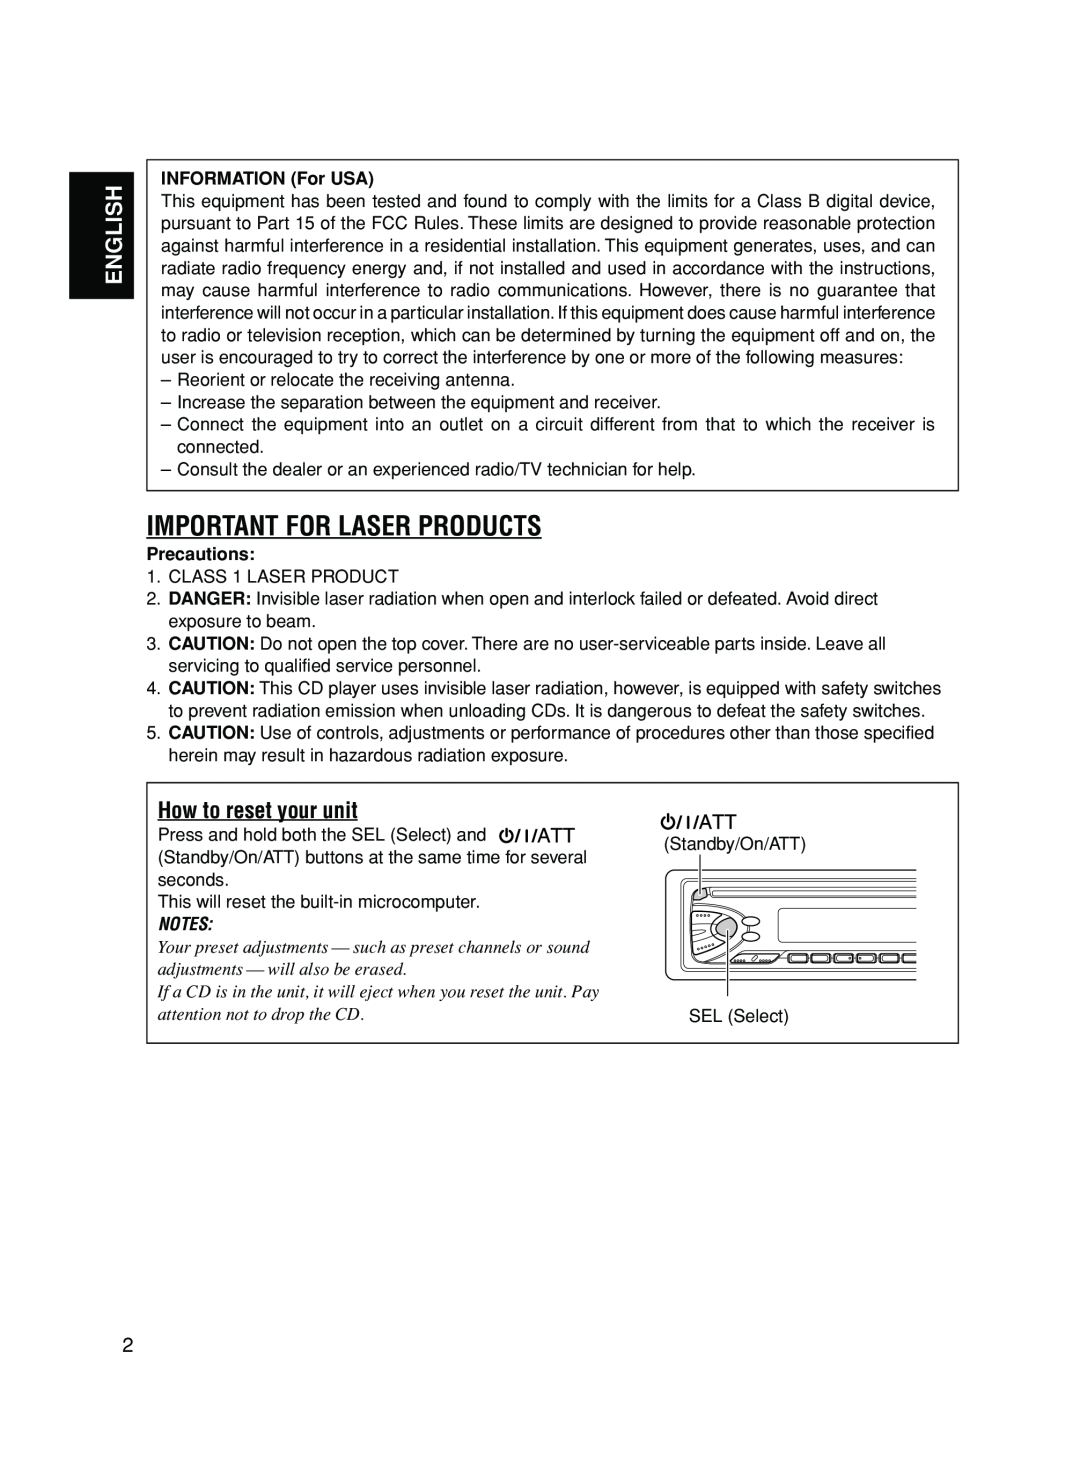 JVC KD-S50 manual Important For Laser Products, English, How to reset your unit, INFORMATION For USA, Precautions 